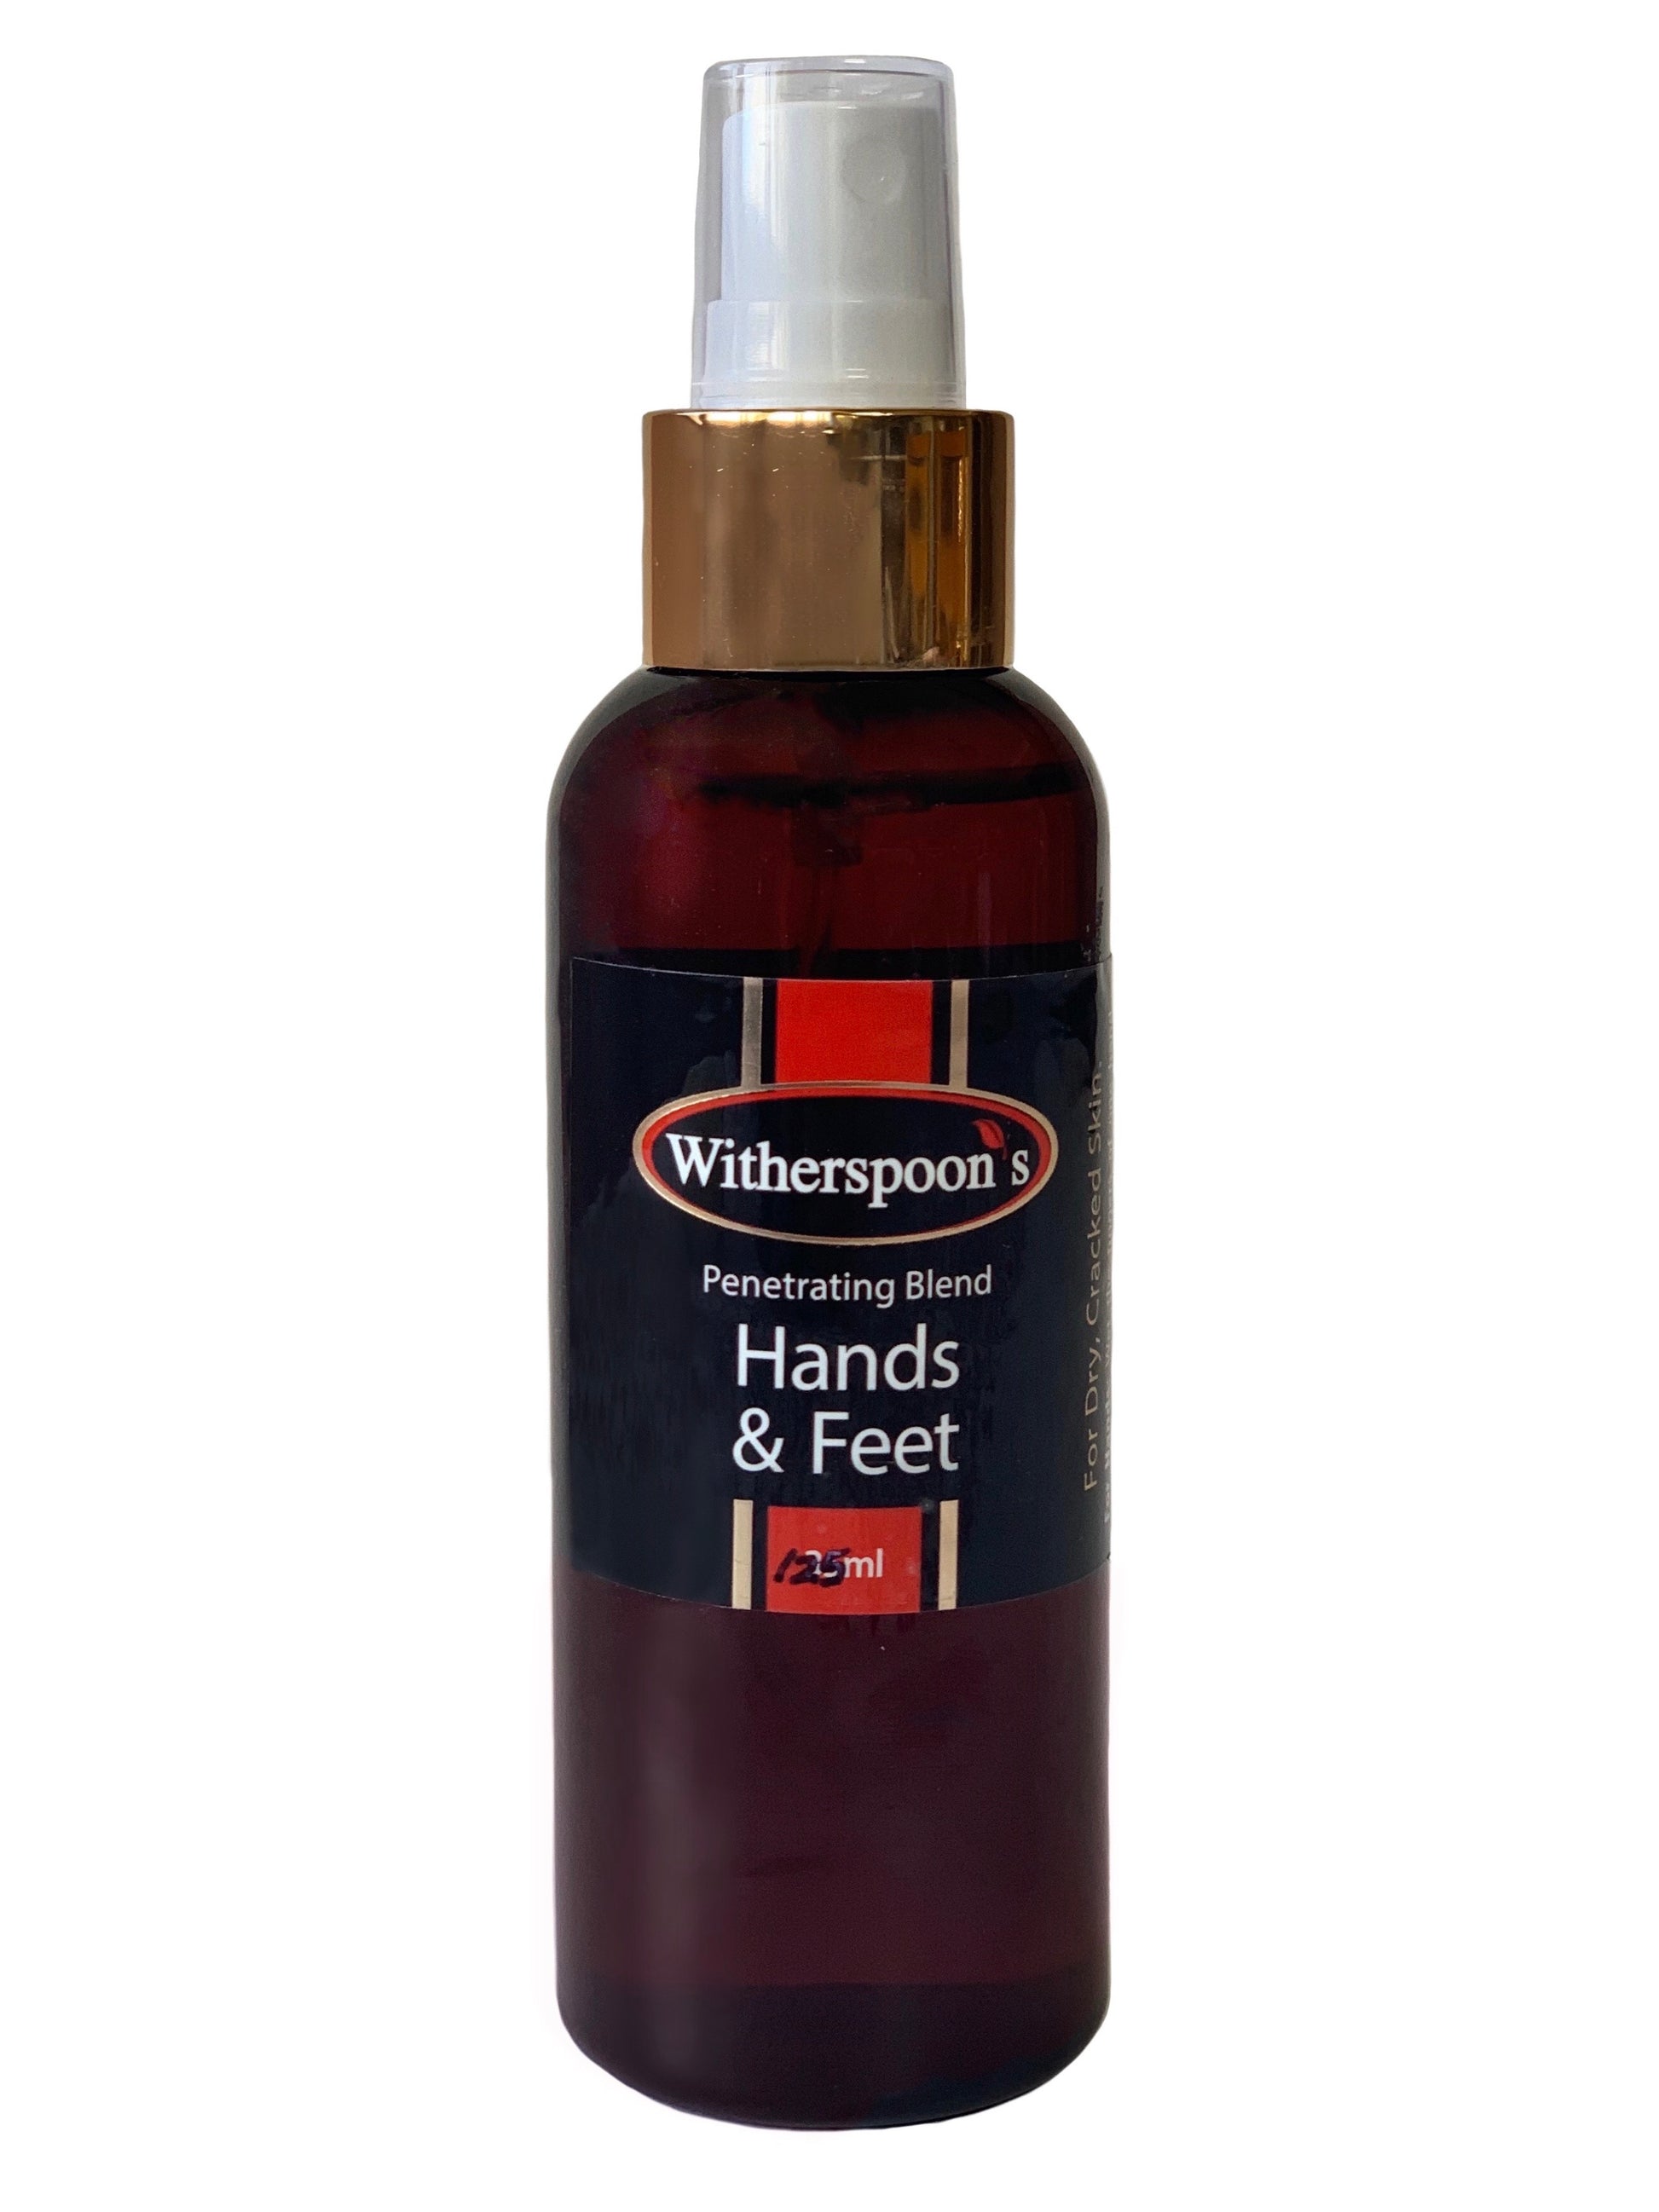 Witherspoon's Hands & Feet. Hydrating oils for hands, body and feet. Hydrating for dry skin, cracked feet or cuticles. Treats eczema, dermatitis and dry damaged skin. This is large bottle: 125mls